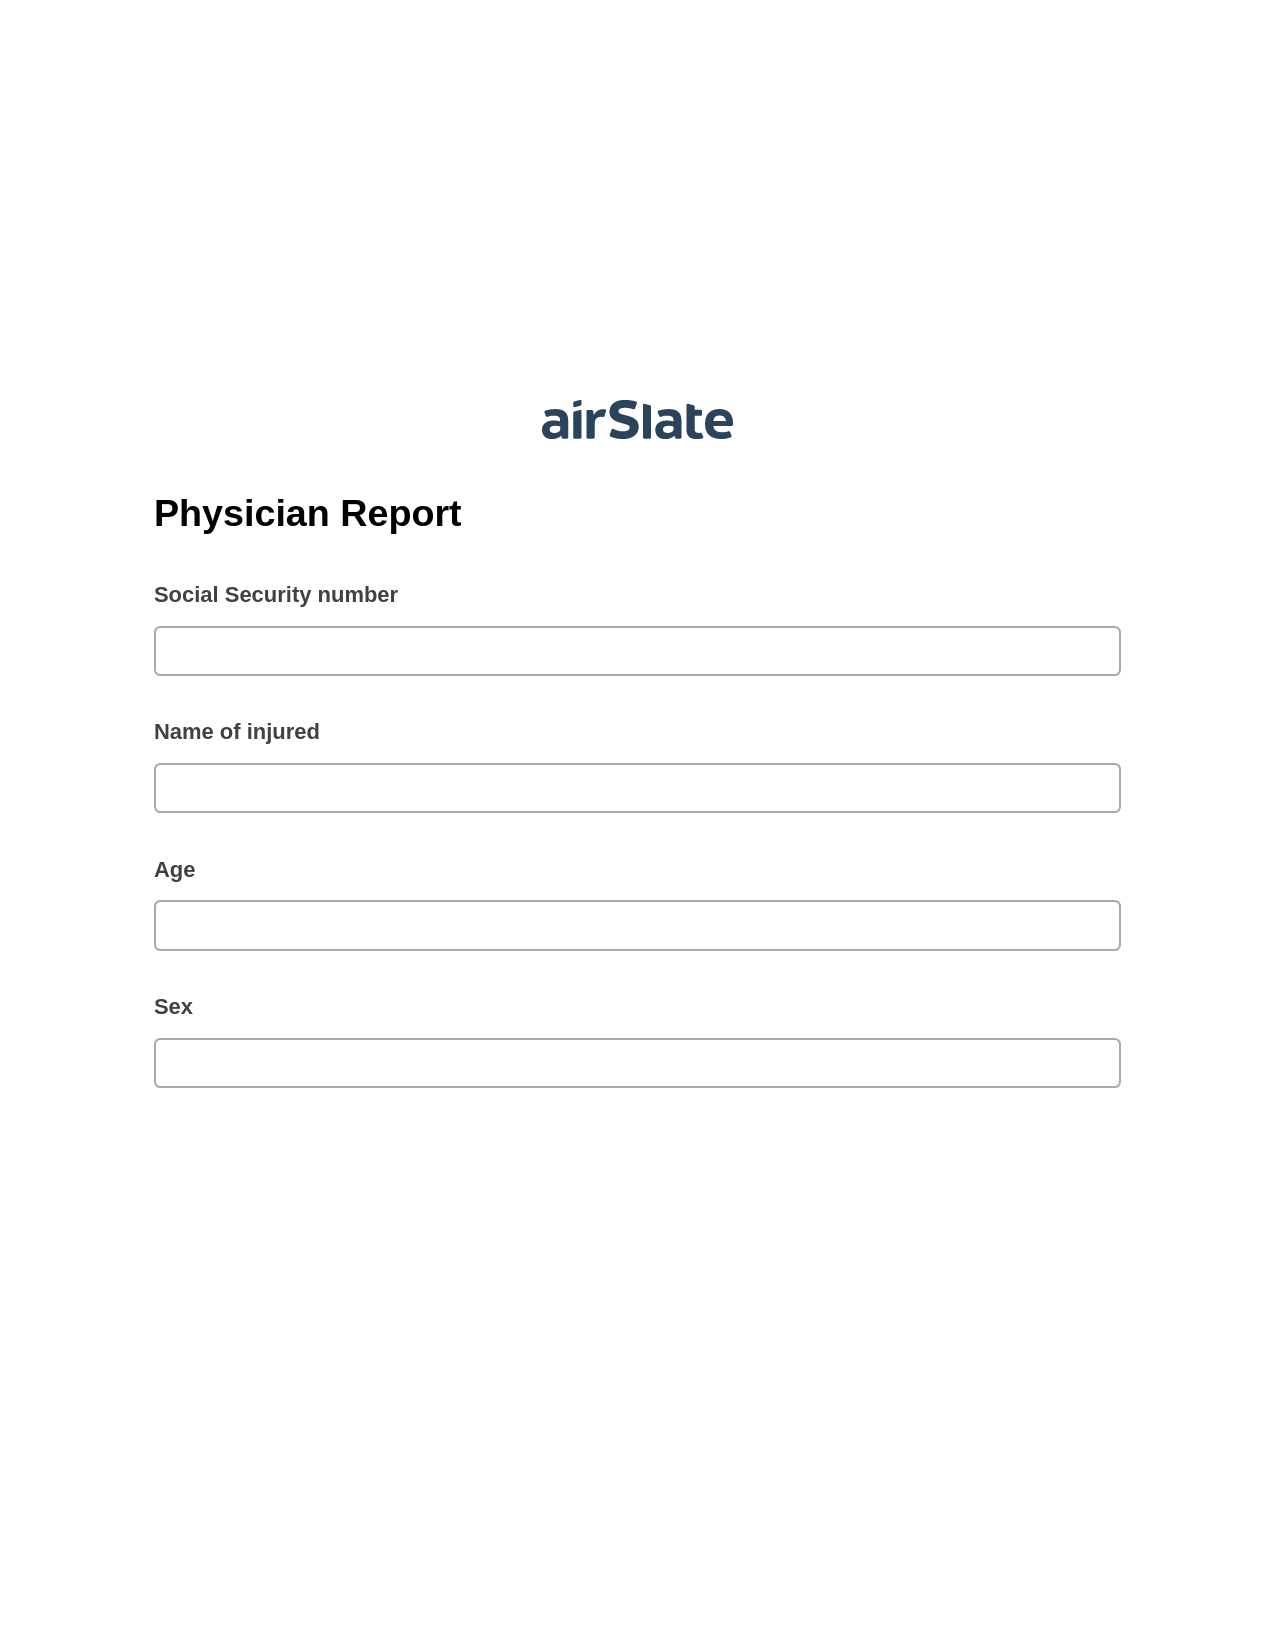 Physician Report Pre-fill from CSV File Bot, Update NetSuite Record Bot, Archive to Box Bot